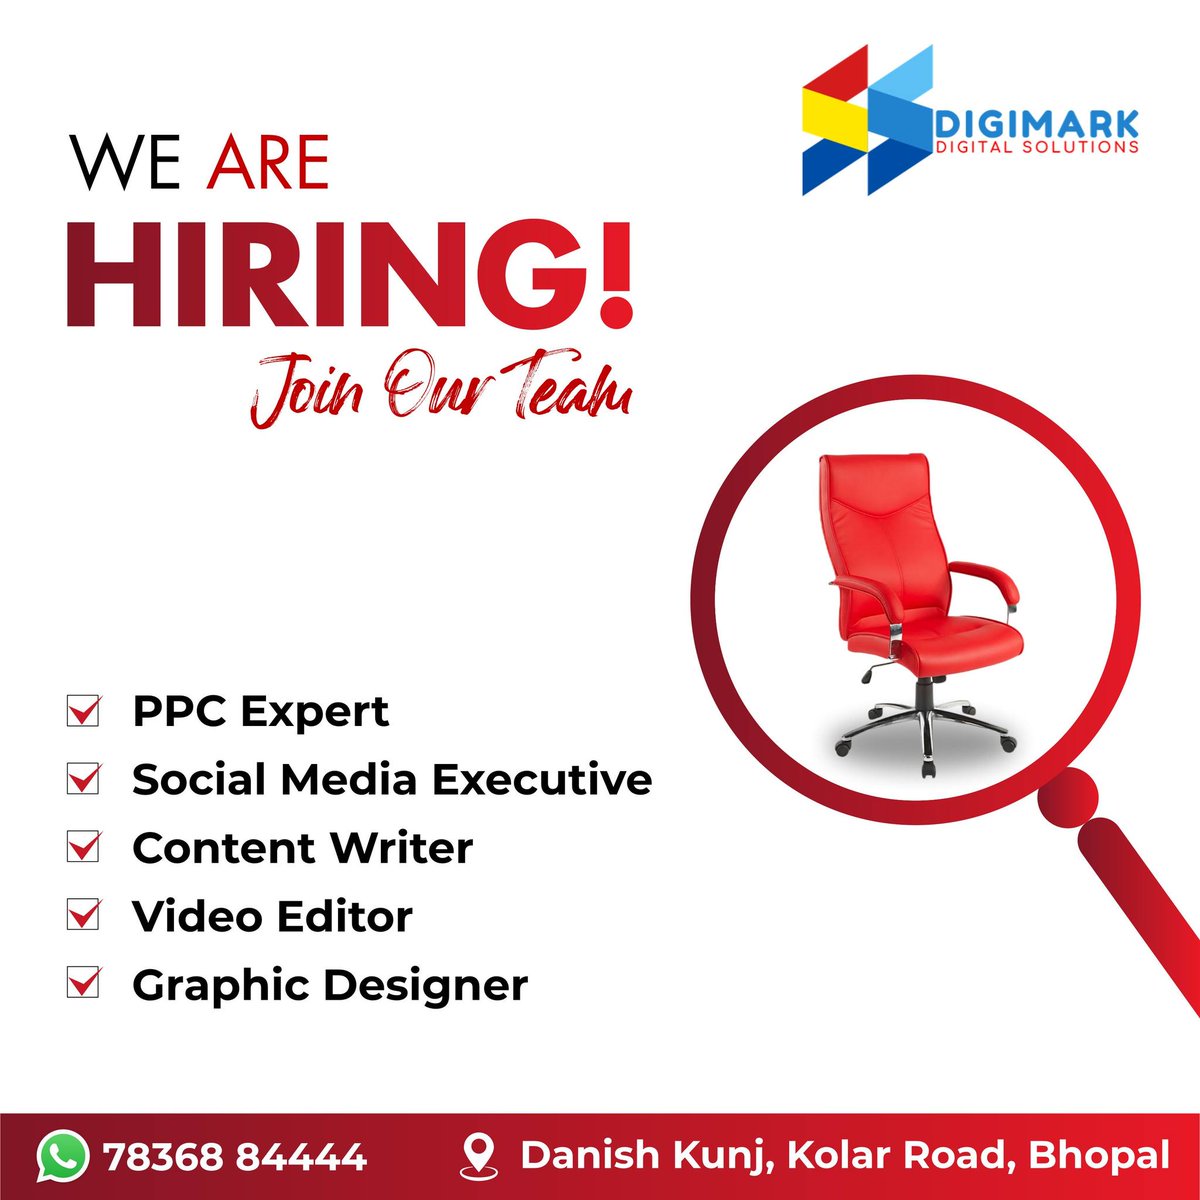 Are you looking for a job vacancy in a digital marketing agency? If yes, then your wait ends here. We are hiring passionate individuals for the following profiles.

+91-7836884444
ssdigimark.com

#ppcexpert #socialmedia #contentwriter #videoeditor #graphicdesigner